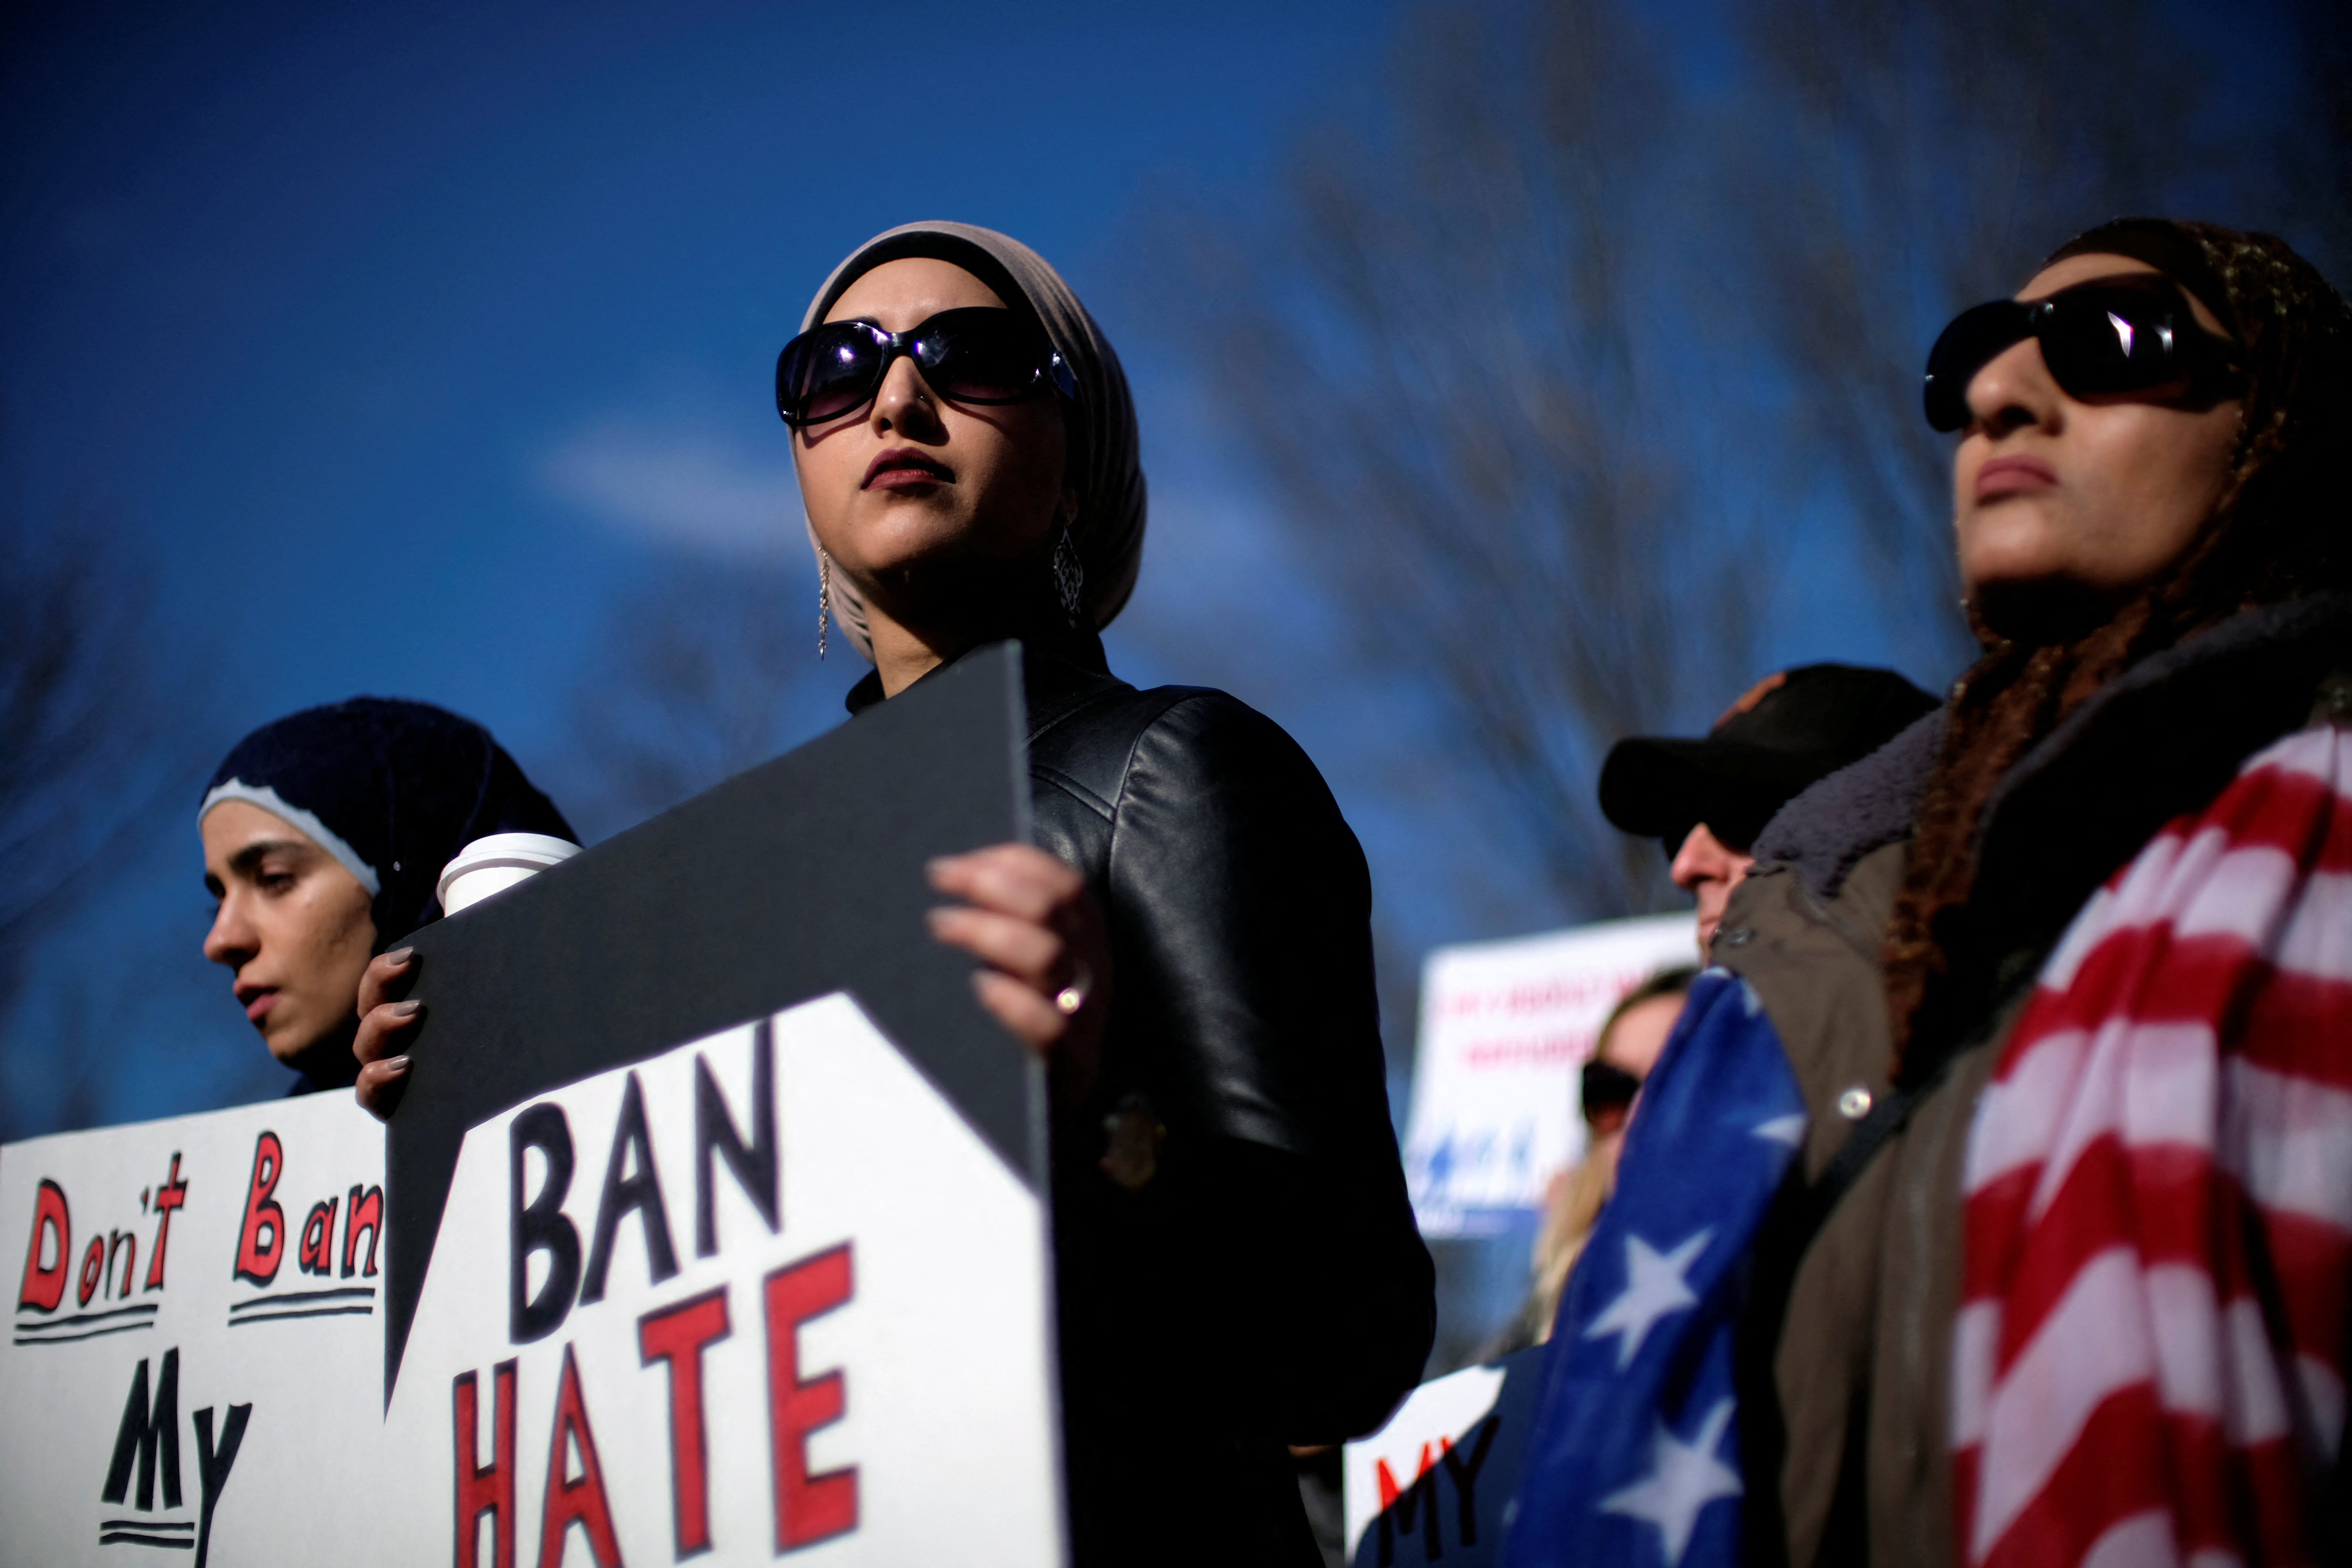 Activist groups including the Council on American-Islamic Relations, MoveOn.org, Oxfam, and the ACLU hold a rally in front of the White House to mark the anniversary of the first Trump administration travel and refugee ban in Washington